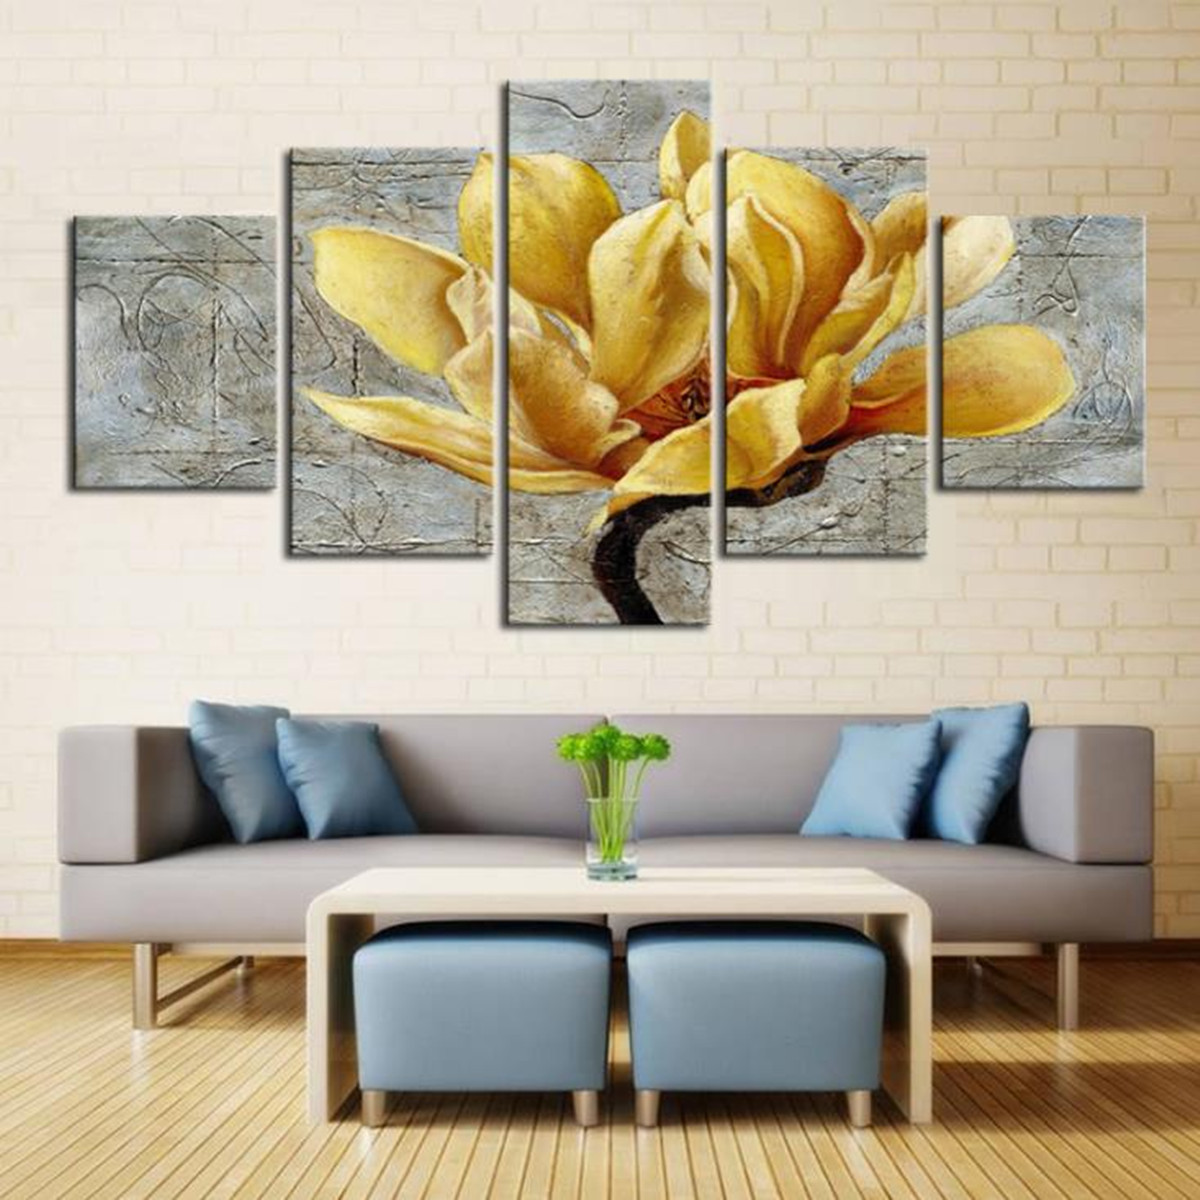 5Pcs-Unframed-Modern-Art-Oil-Paintings-Print-Canvas-Picture-Home-Wall-Room-Decor-1639651-2